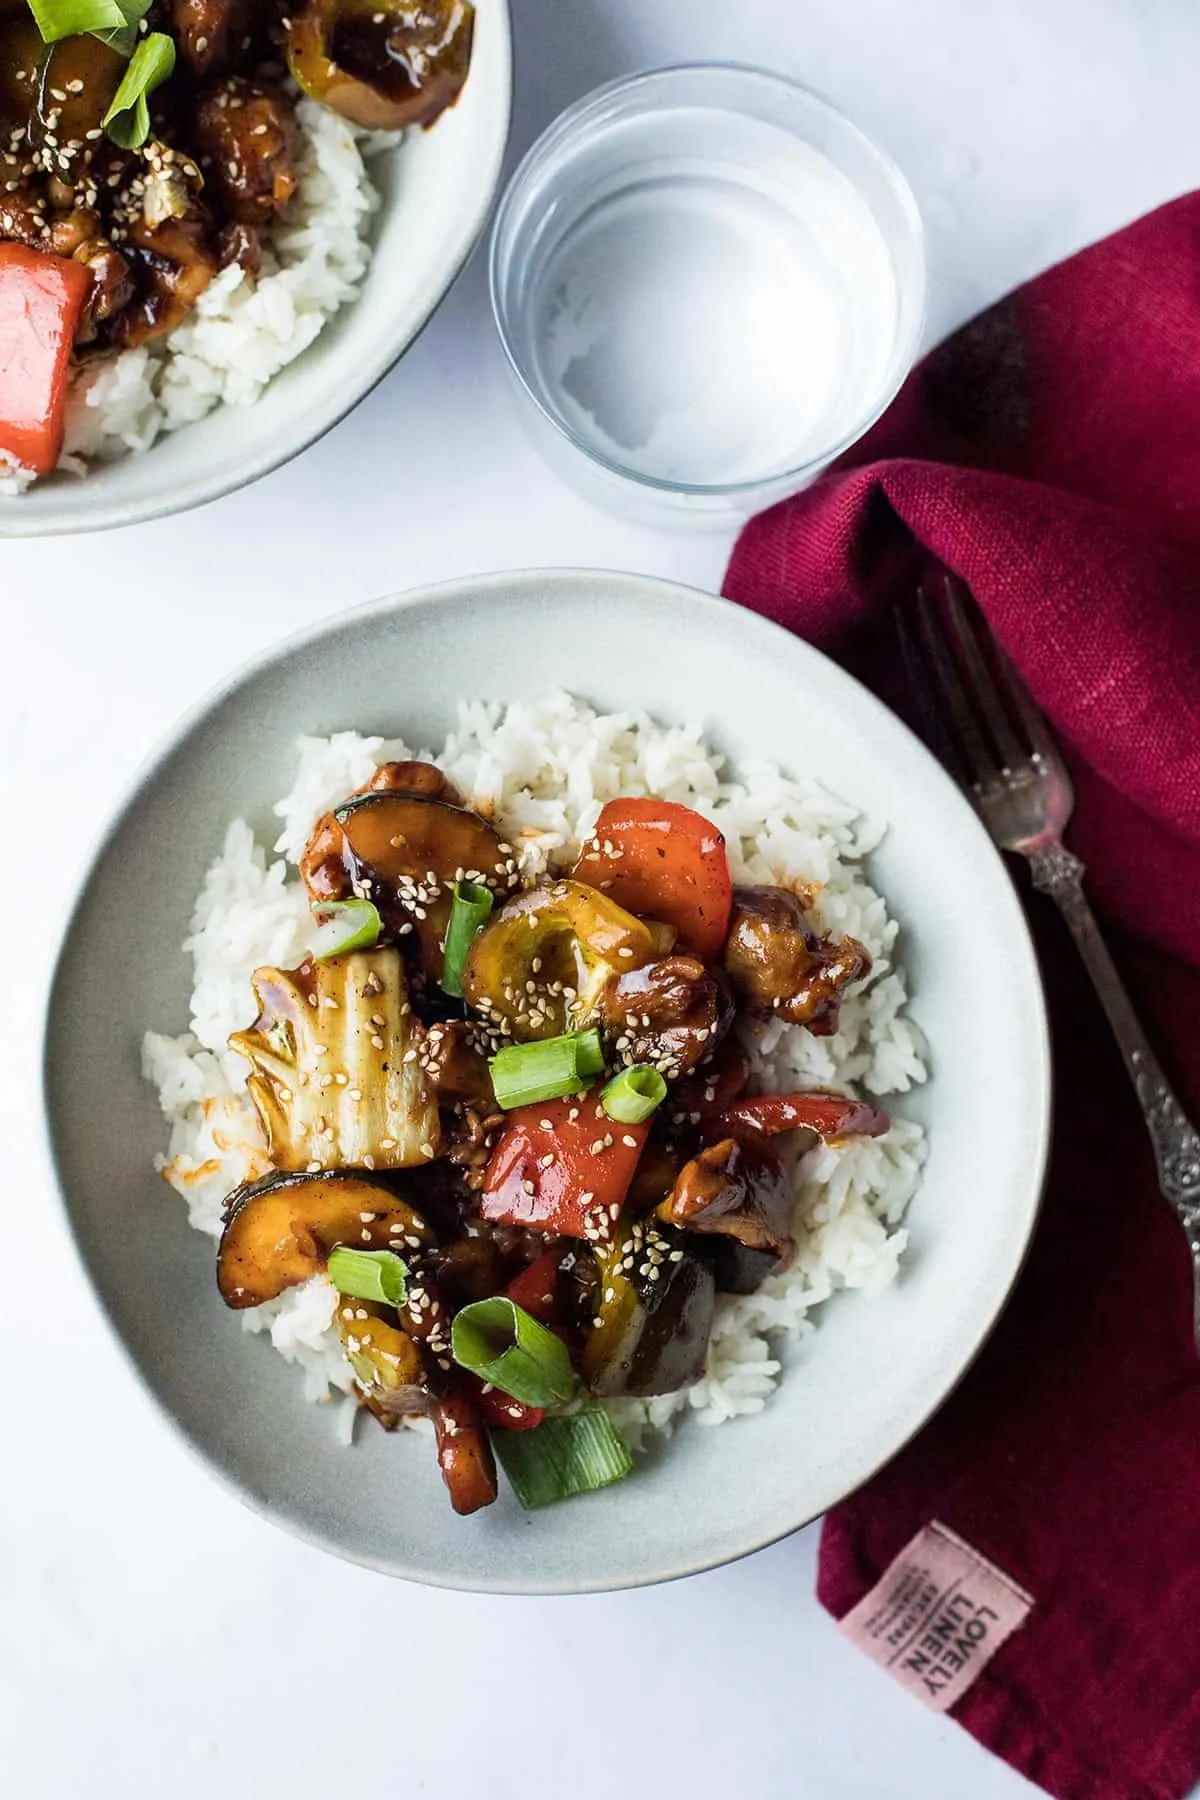 Chicken and vegetables in sweet and sticky sauce.